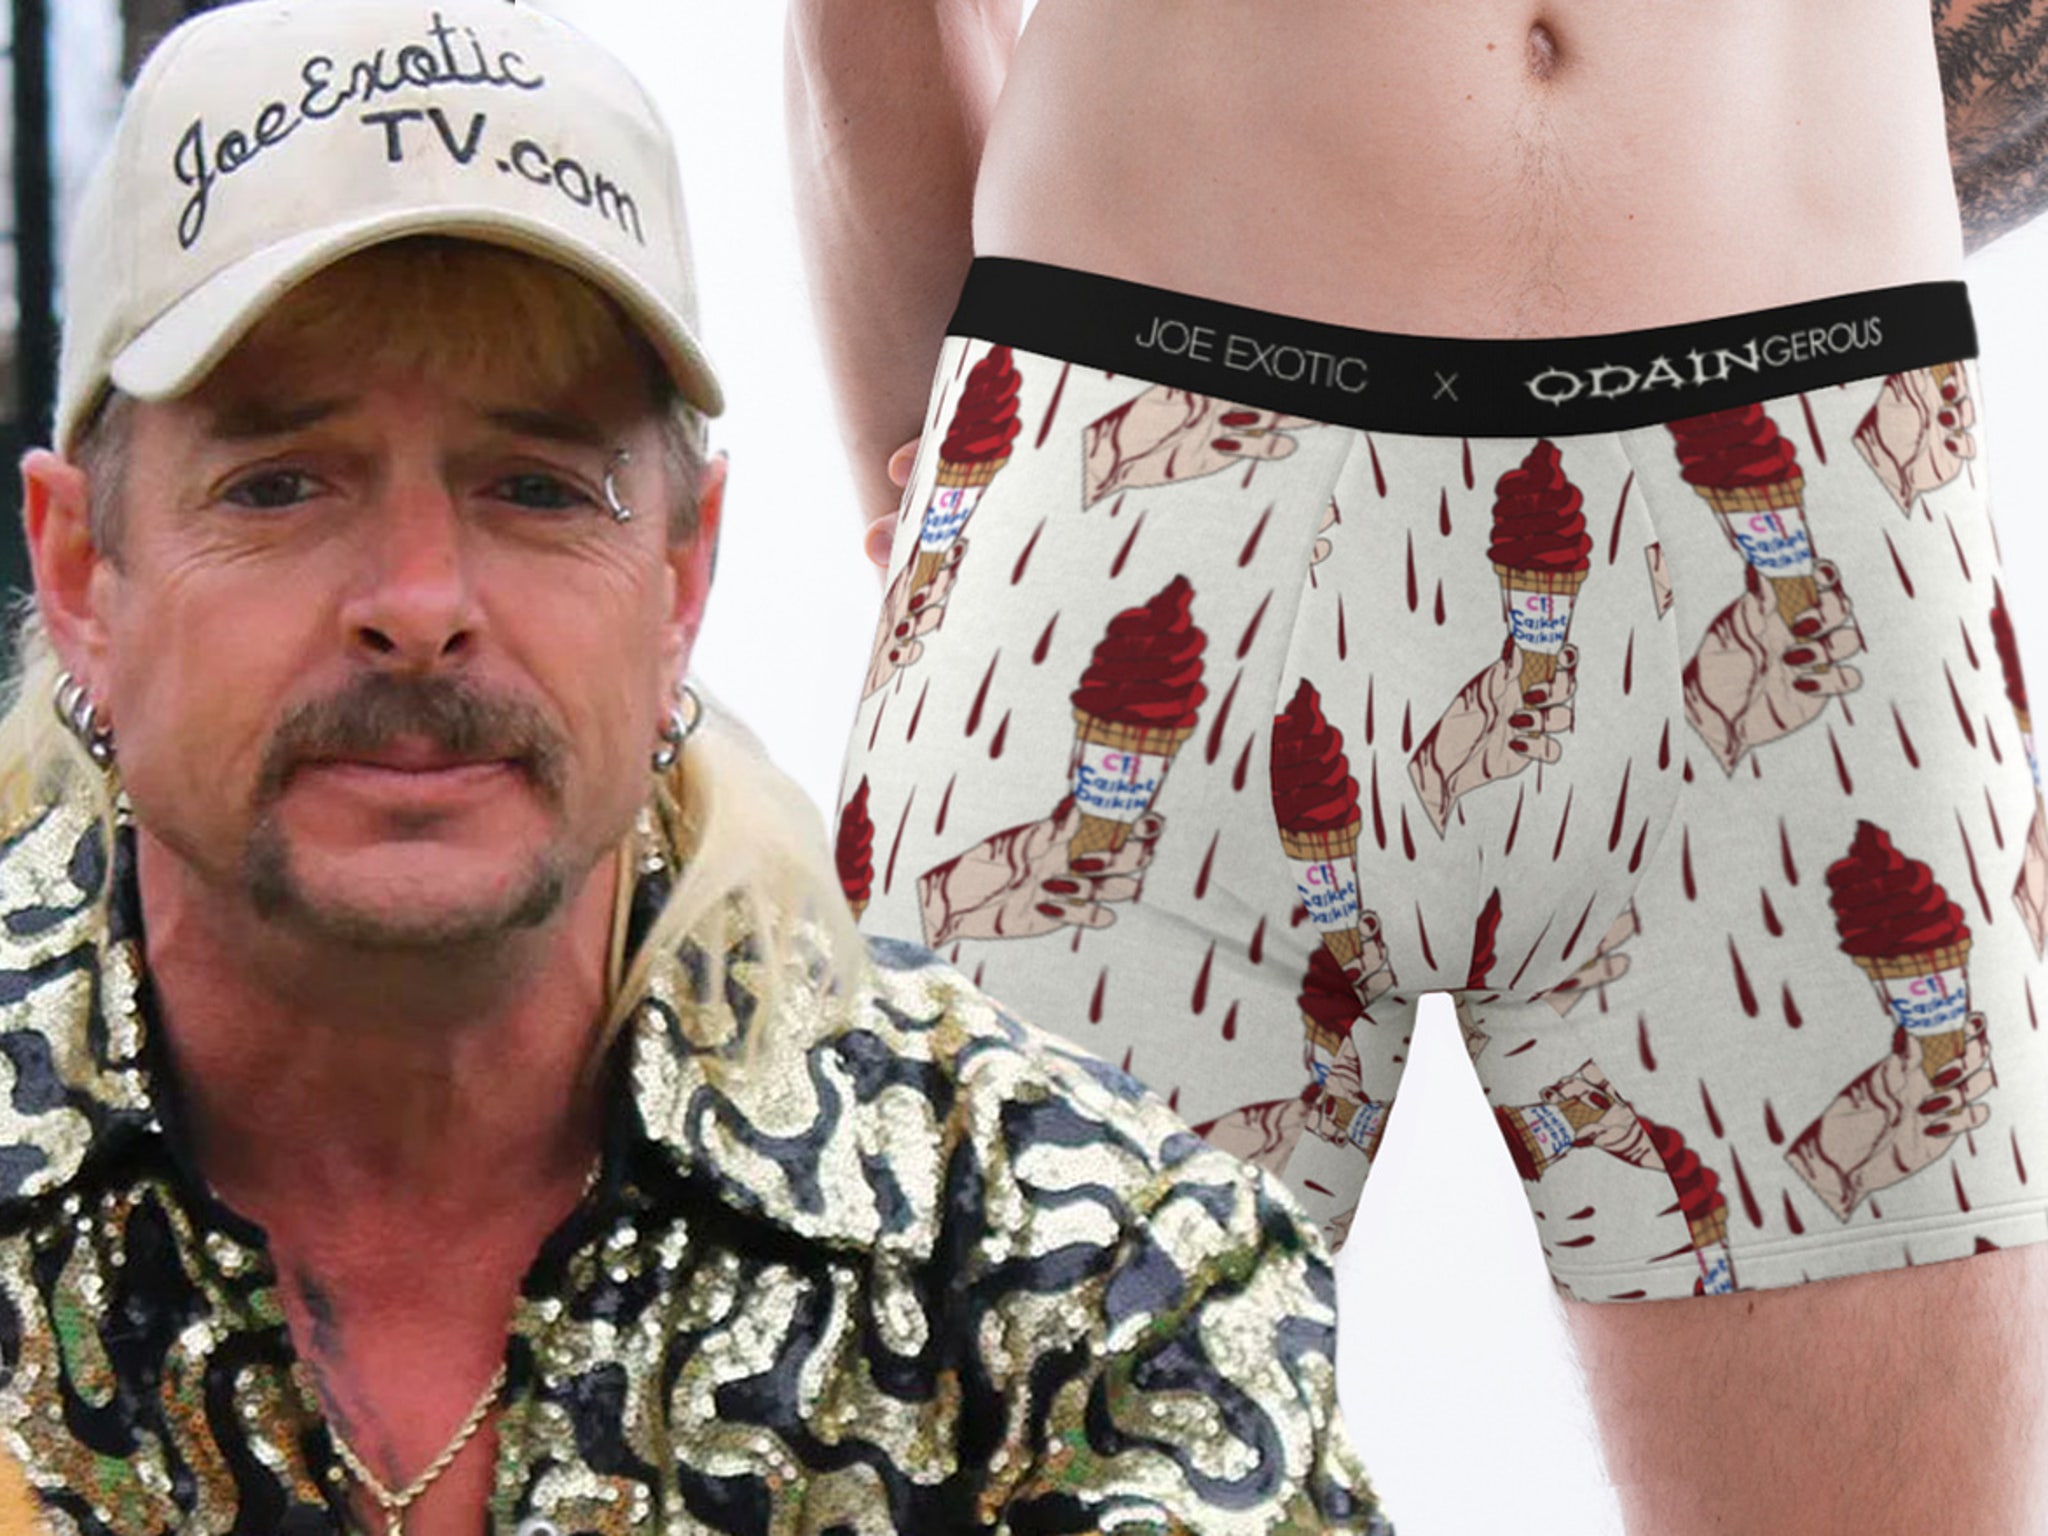 Tiger King's Joe Exotic launches new underwear line with his face